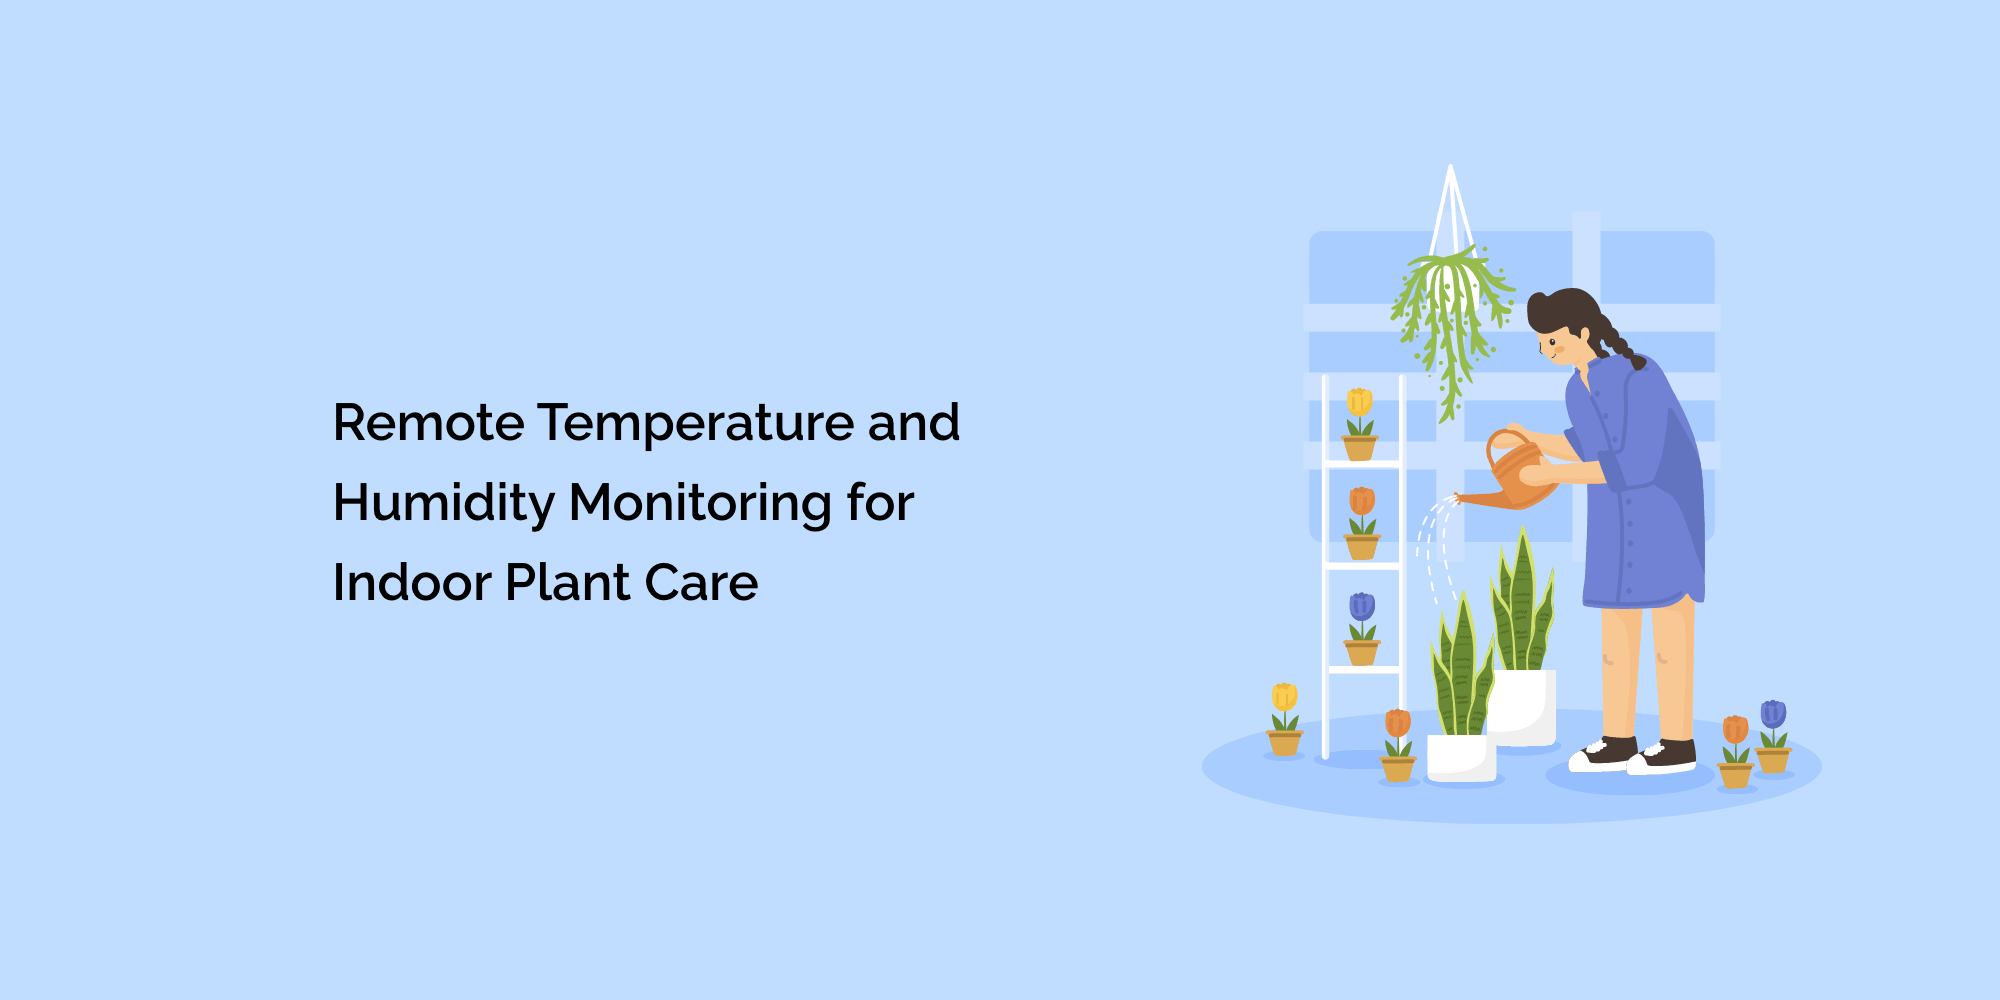 Remote Temperature and Humidity Monitoring for Indoor Plant Care